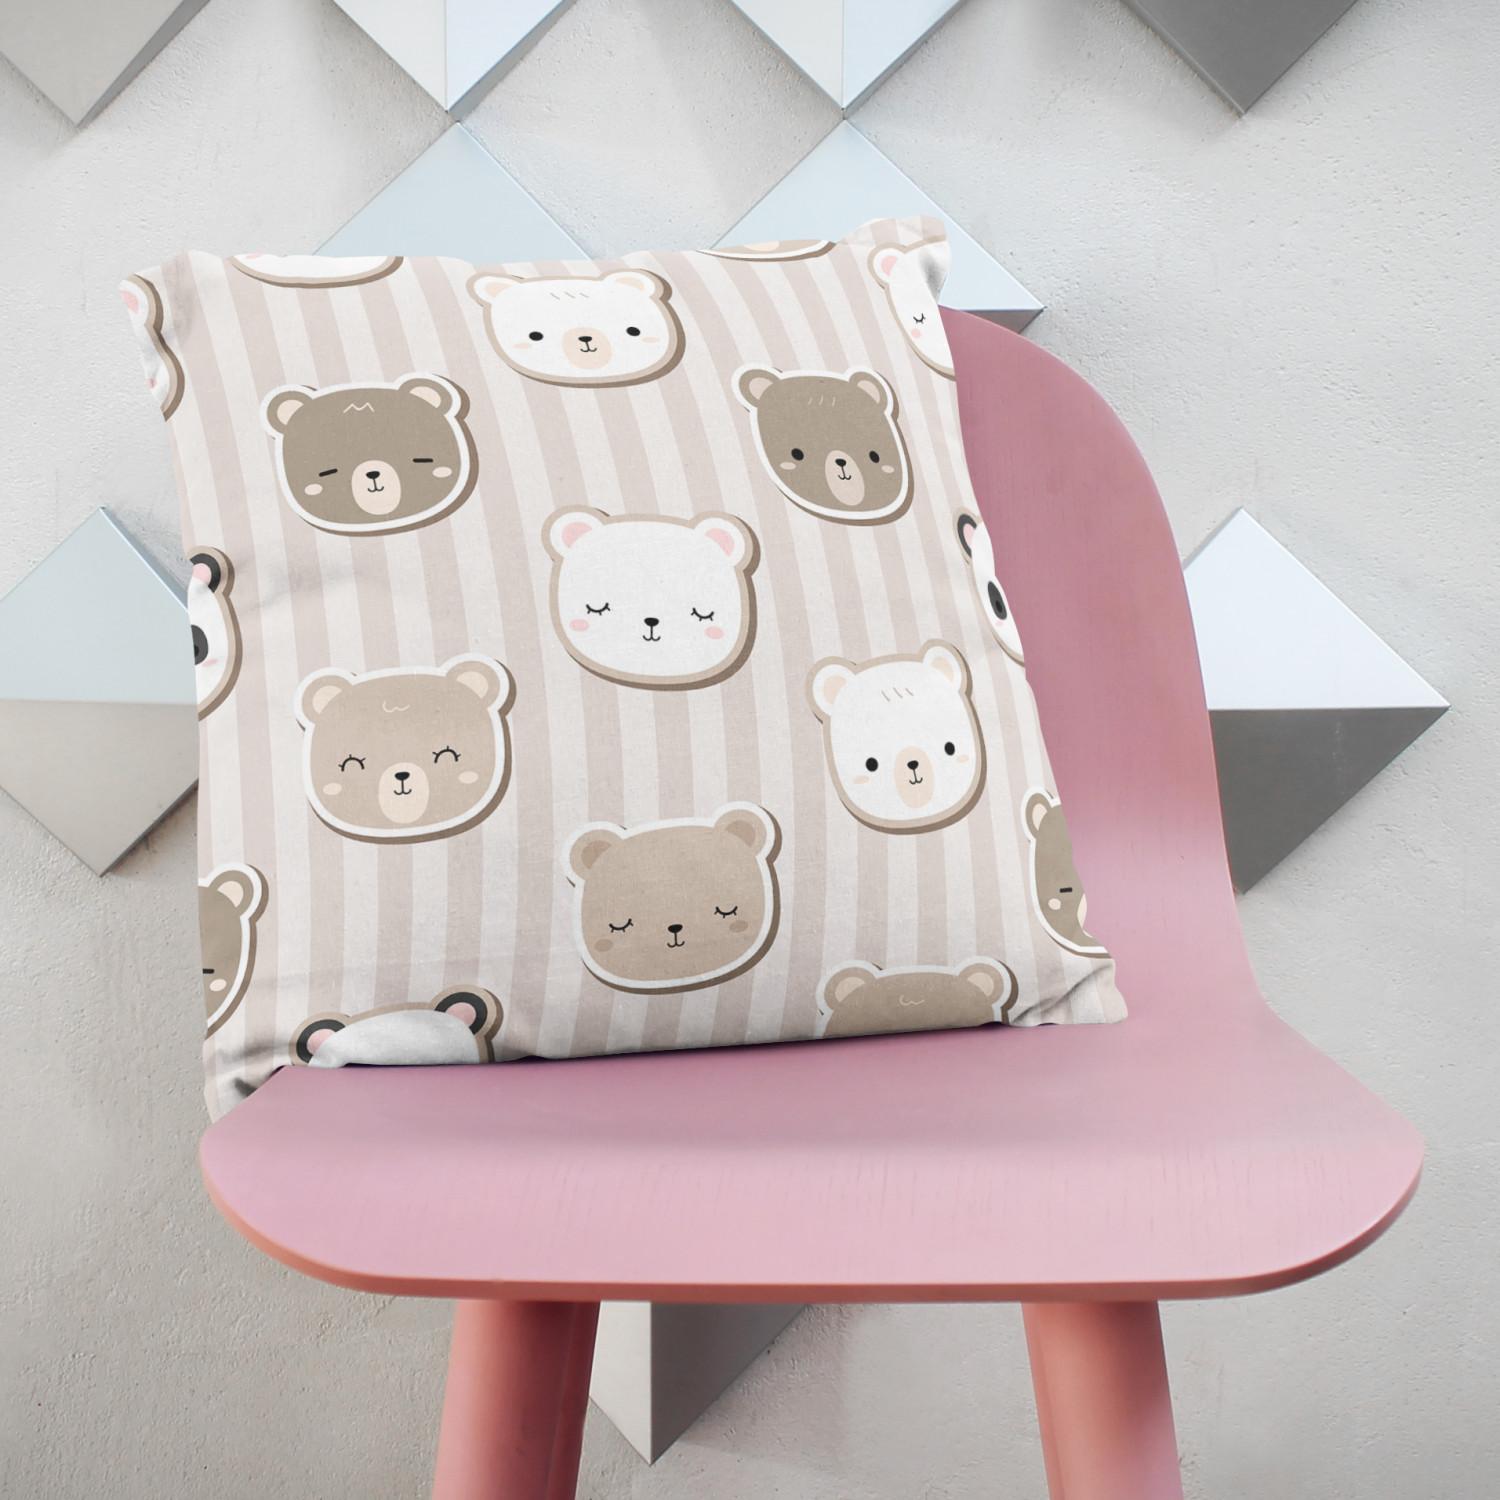 Decorative Microfiber Pillow Bear pack - animals on striped background in shades of brown and white cushions